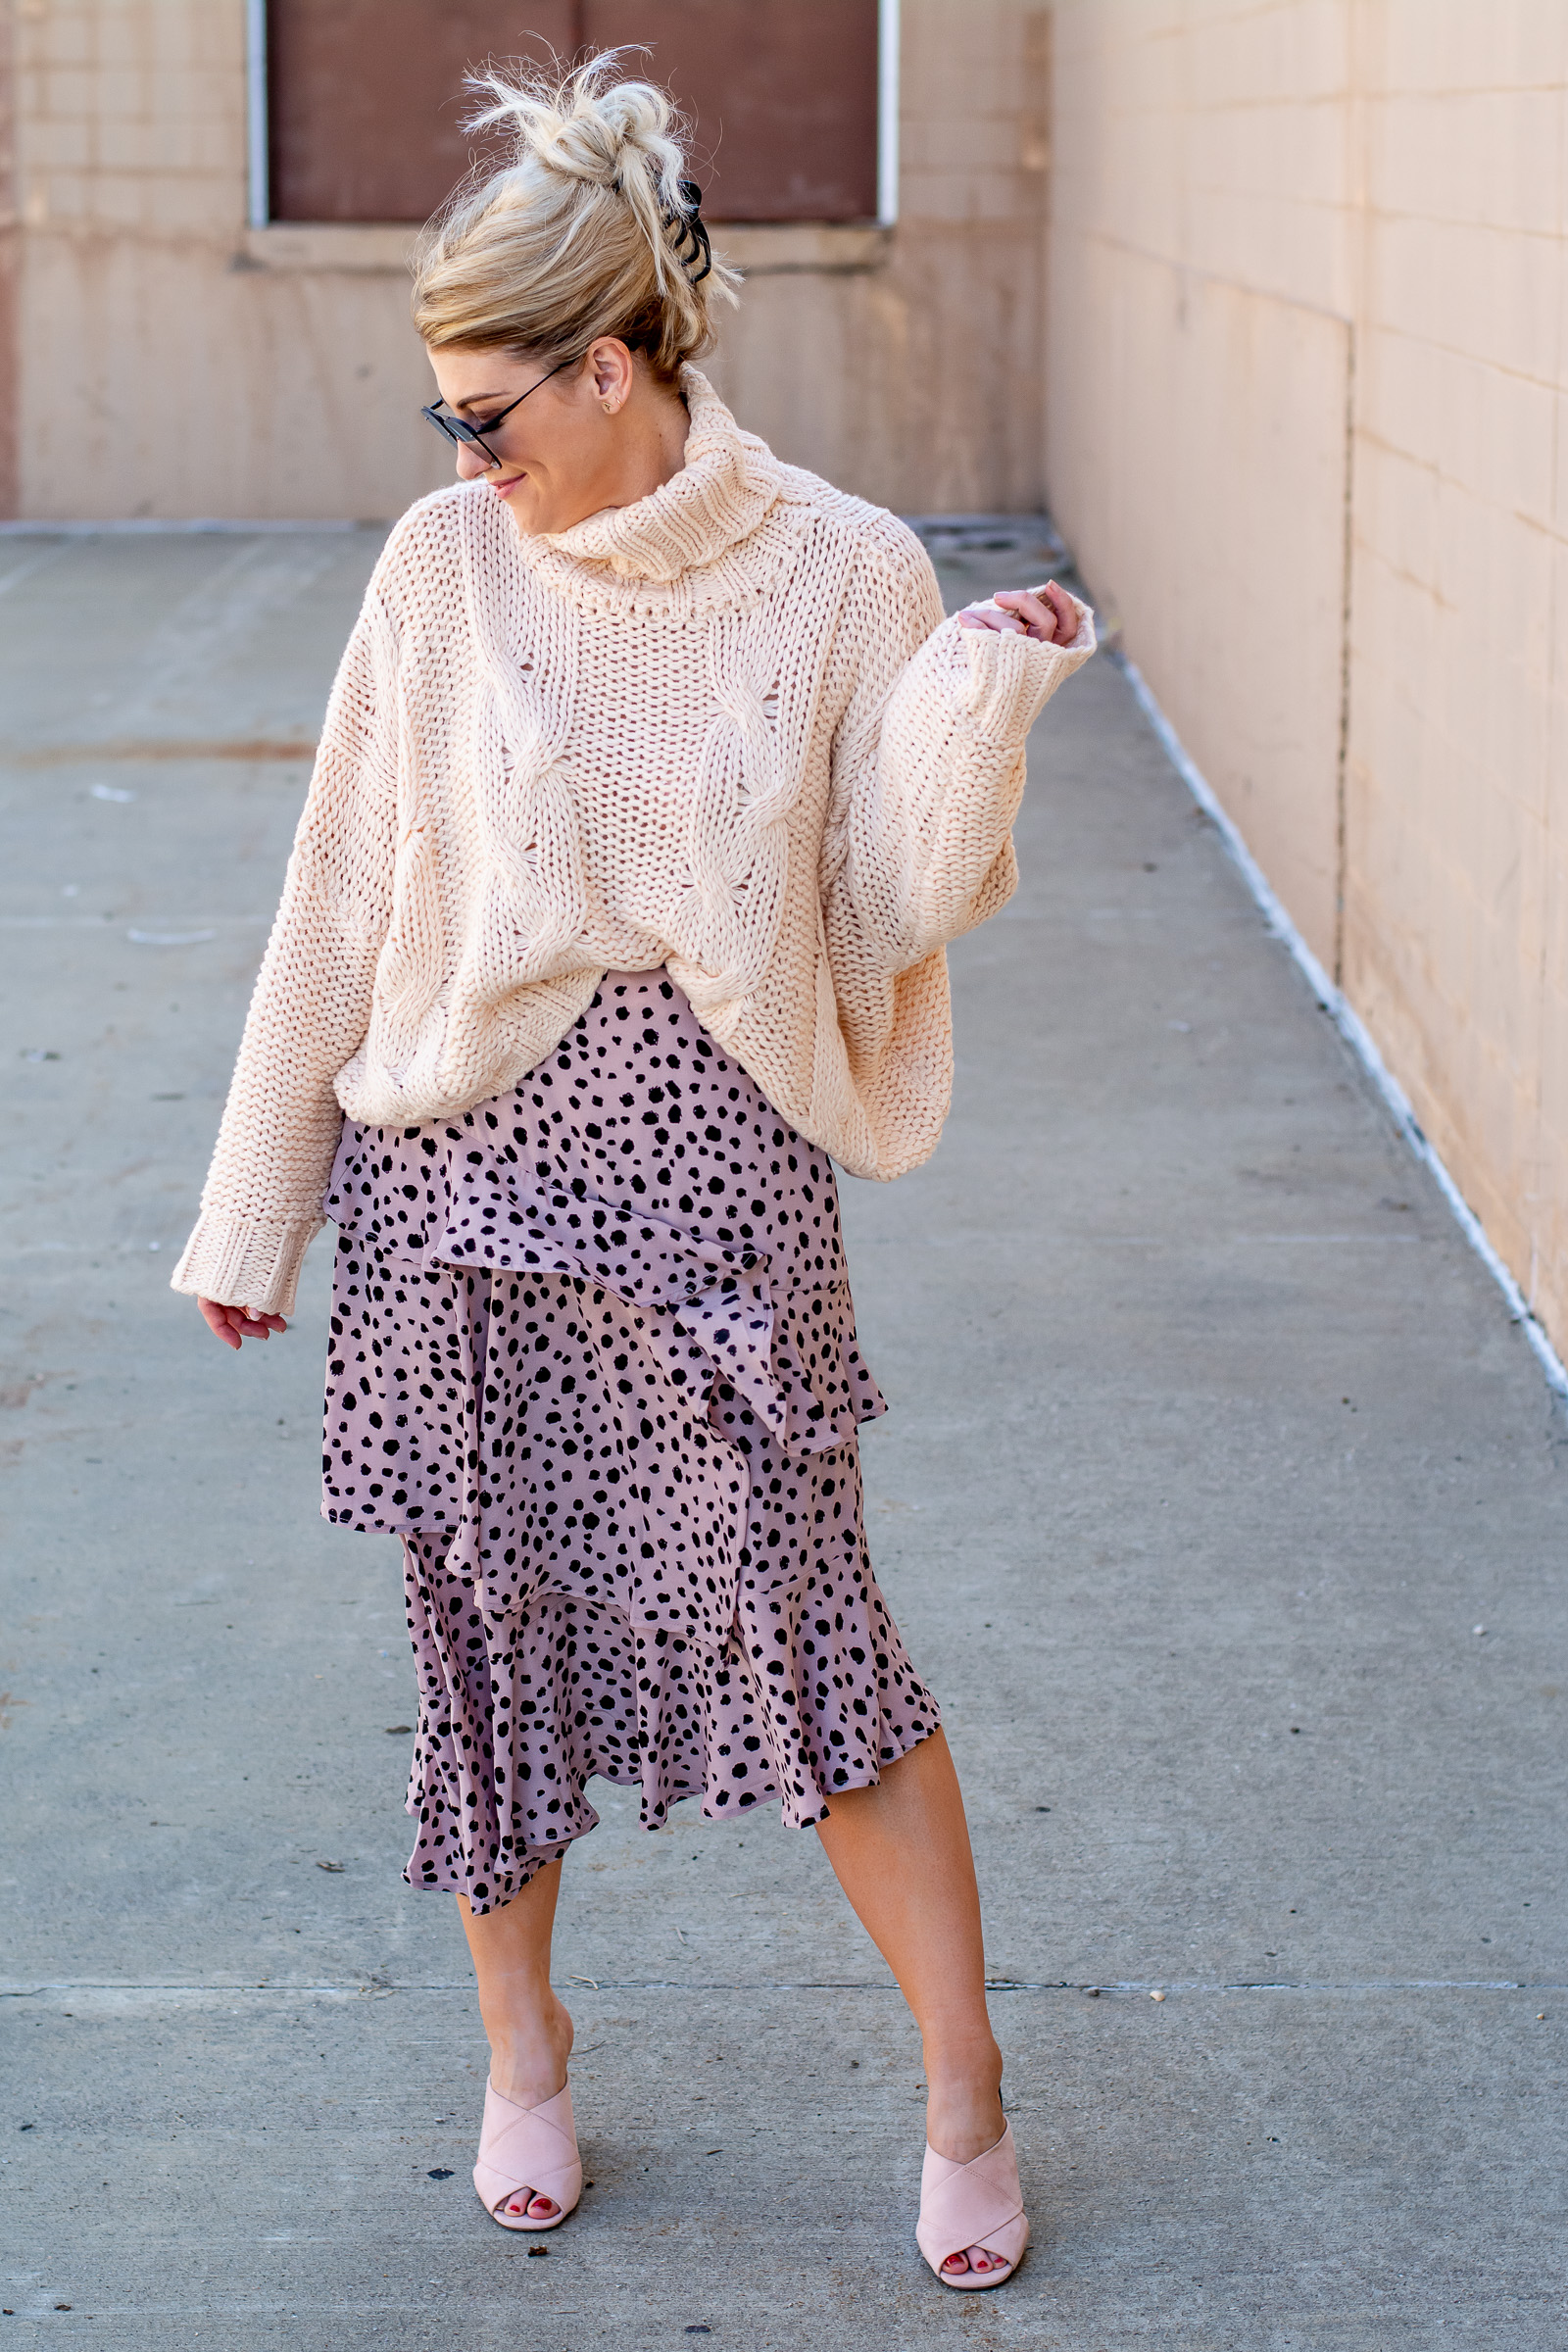 Fall Outfit: Sweater and a Ruffled Skirt. | LSR